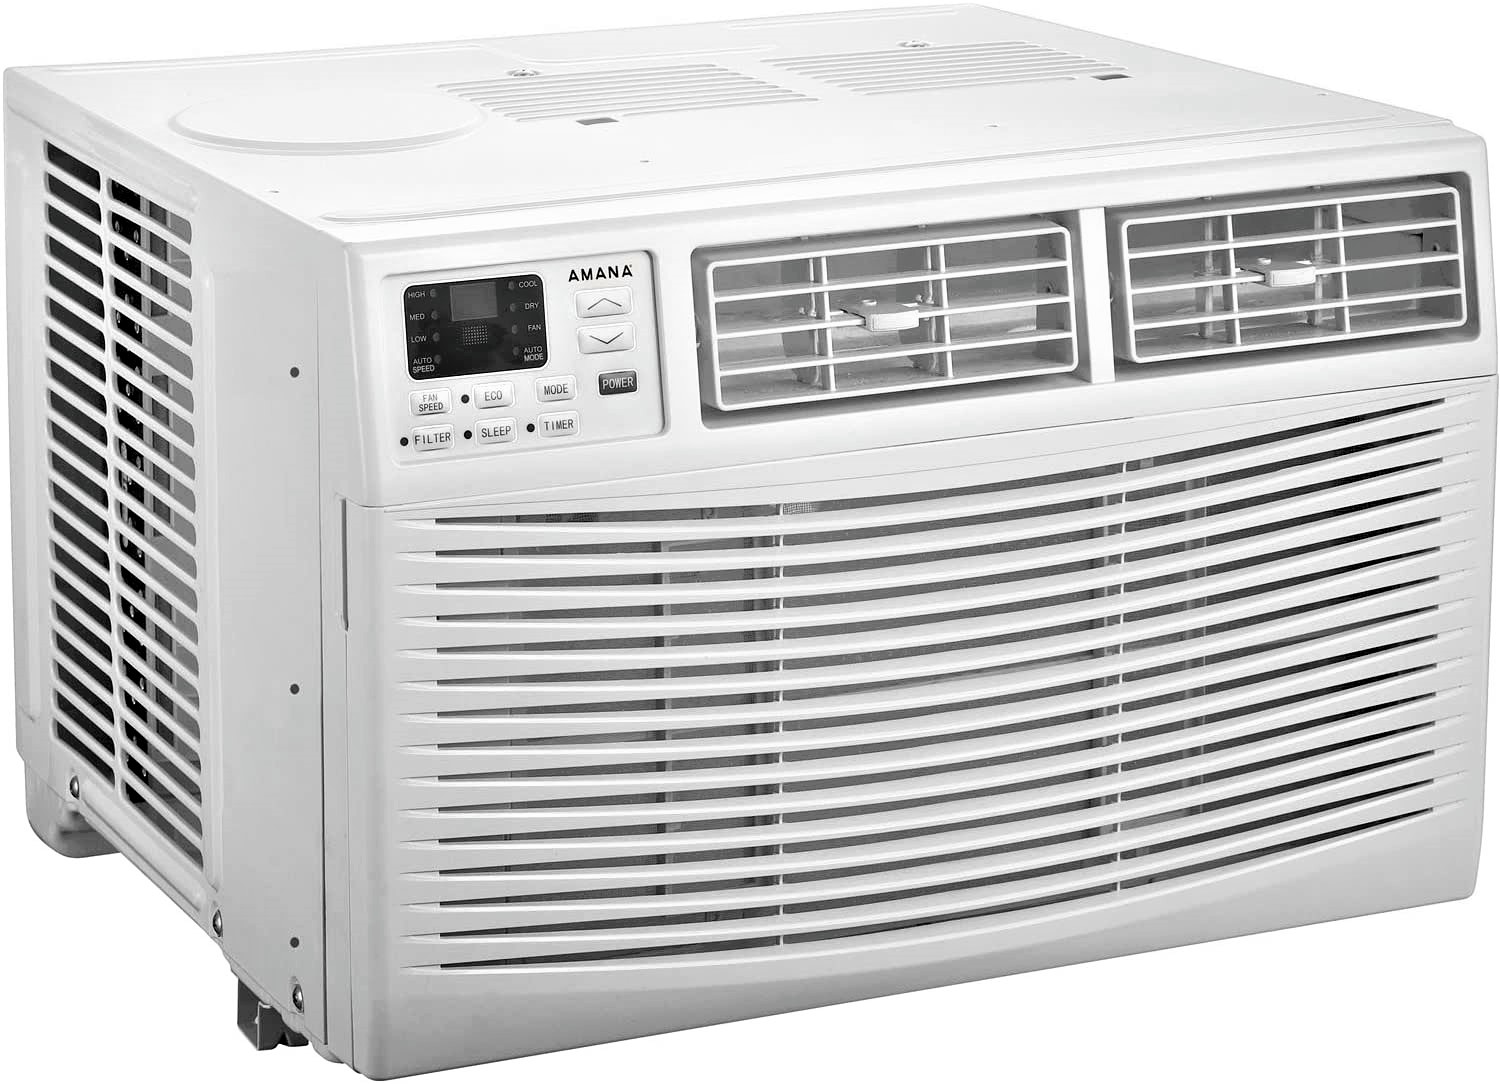 71H4IXsXFmL. AC SL1500 10 BEST AIR CONDITIONERS FOR YOUR GARAGE 2021 REVIEW